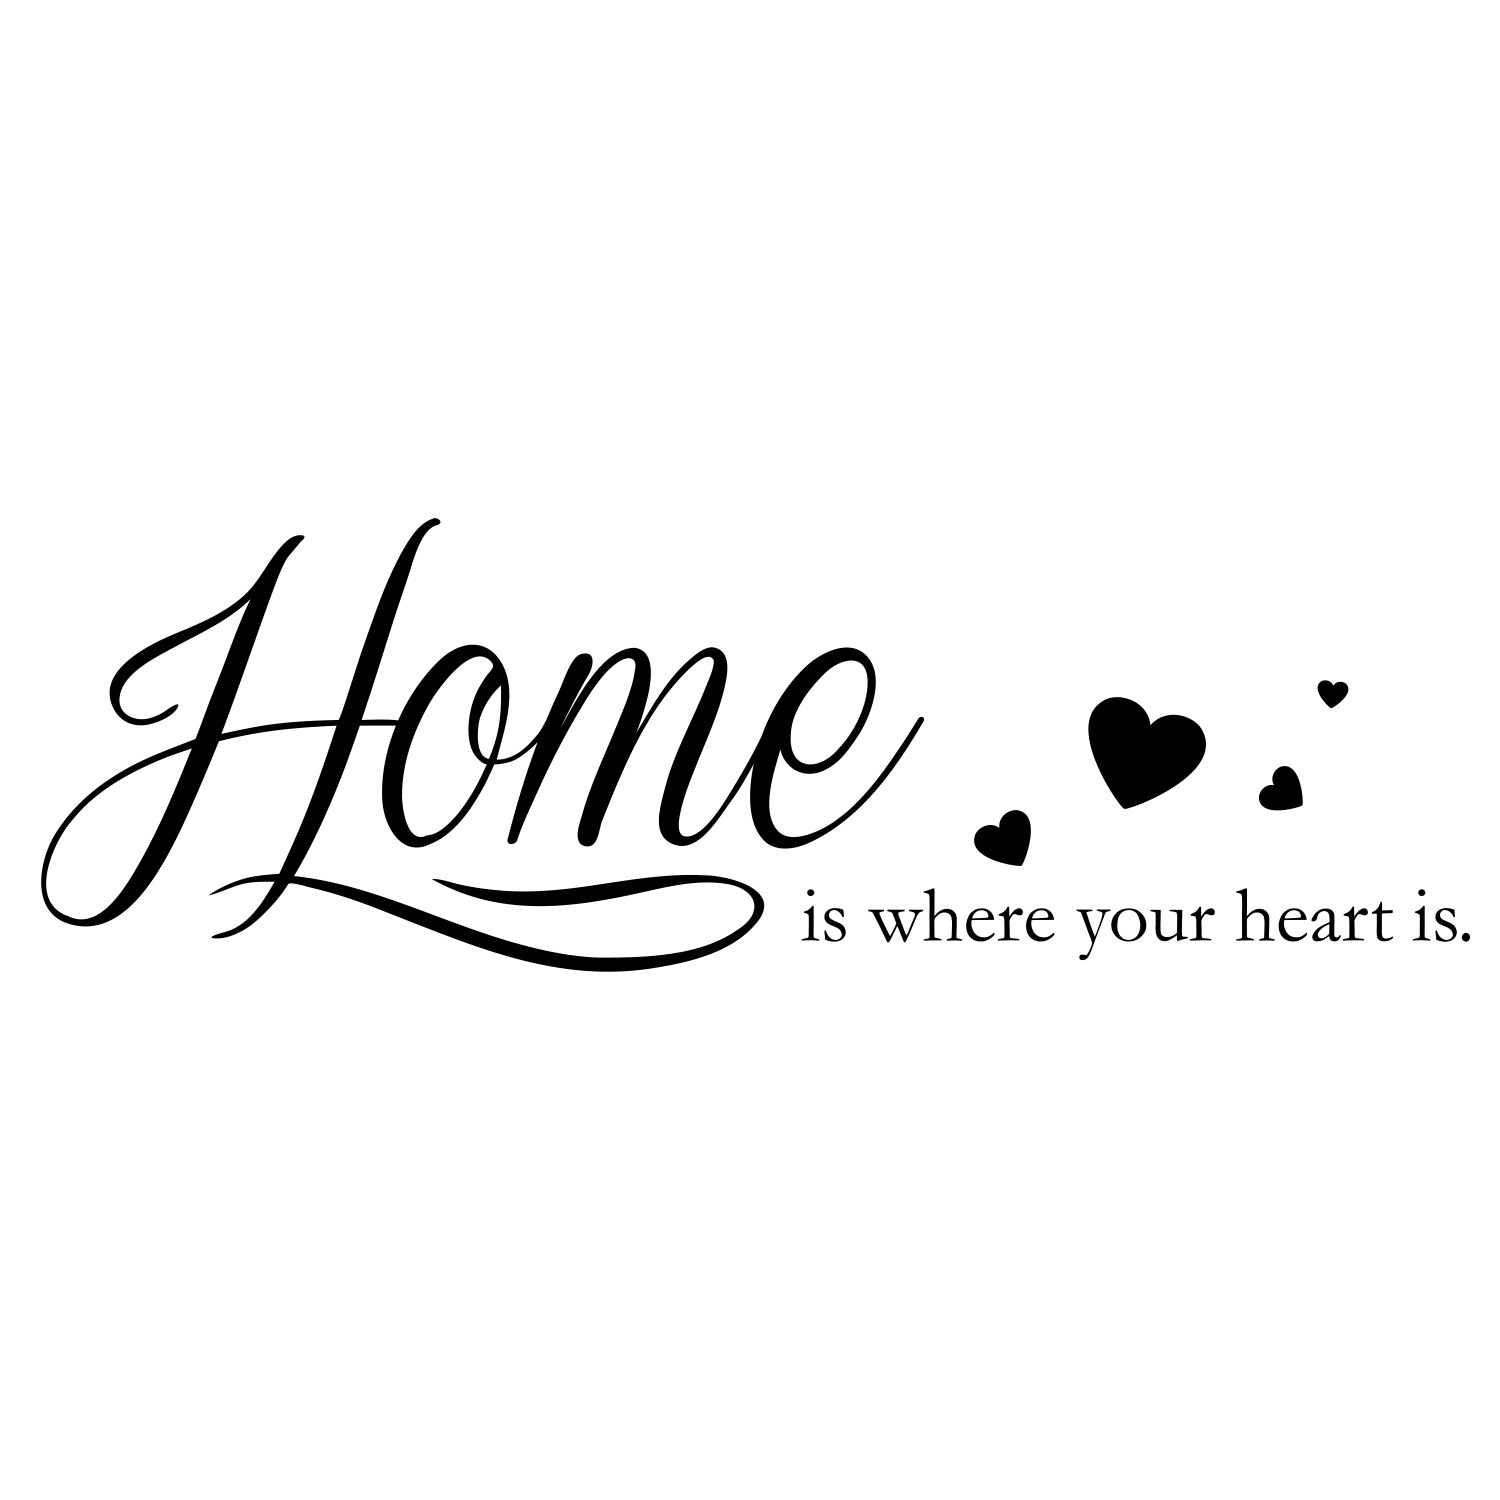 queence Wandtattoo »Home is where your heart is«, 120 x 30 cm